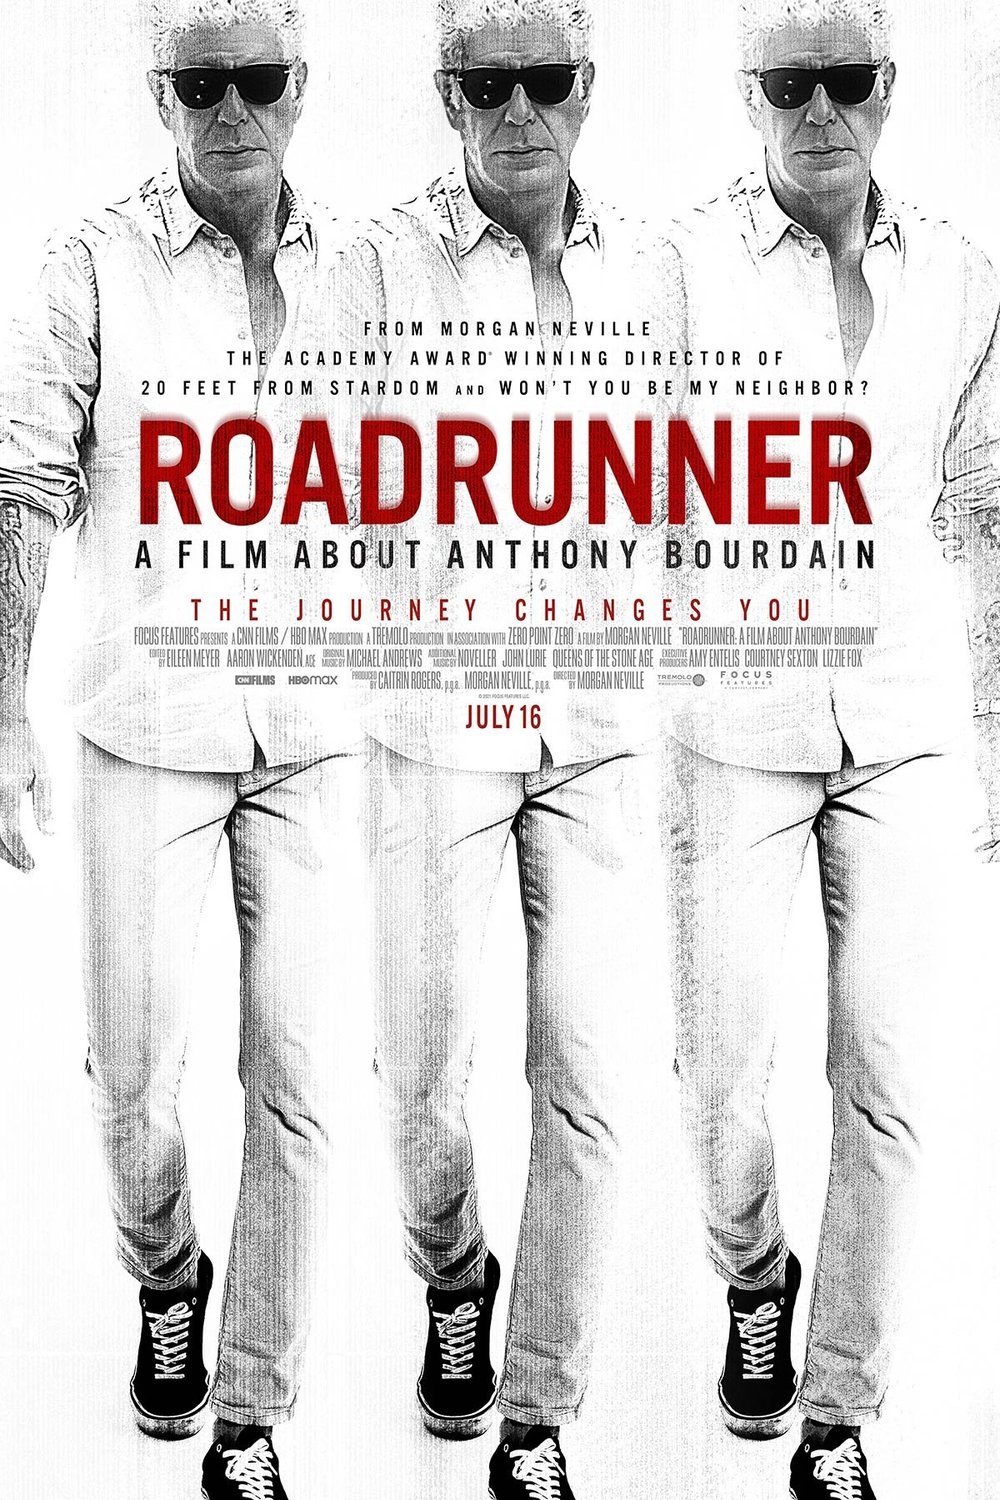 Roadrunner A Film About Anthony Bourdain 2021 I Movie Poster 